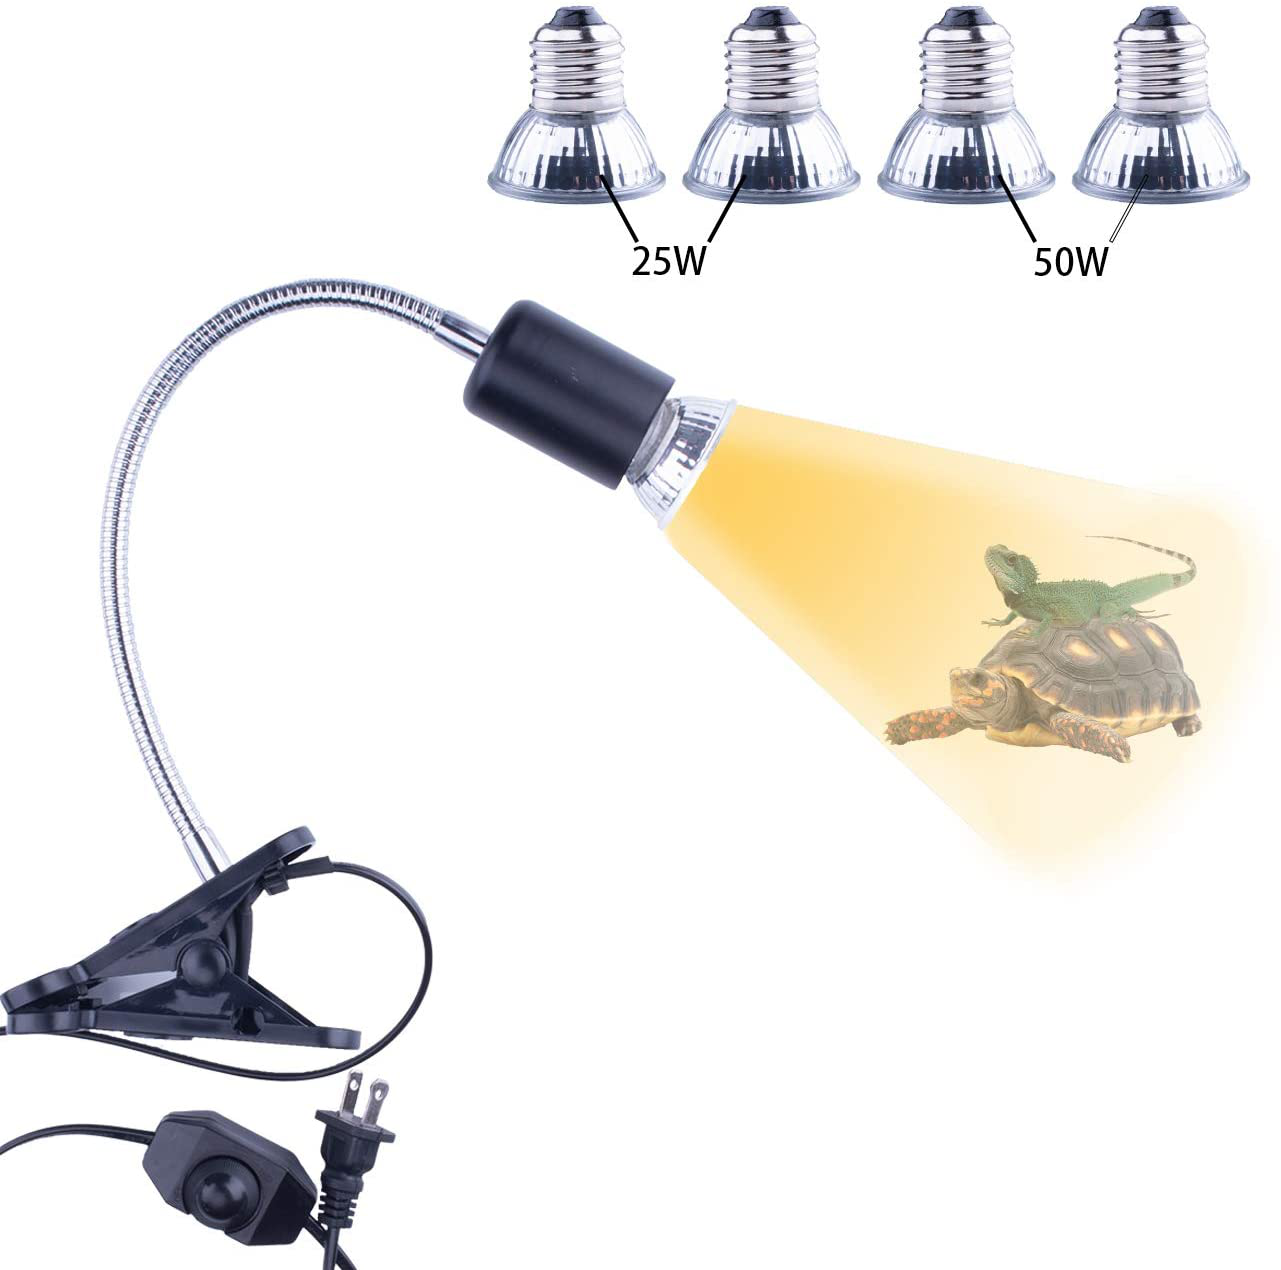 Reptile Heat Lamp, UVB Bulb, UVB Reptile Light Fixture, UVA UVB Reptile Light, Aquatic Turtle Heating Lamp, Turtle Aquarium Tank Heating Lamps Holder & Switch with 4 Heat Bulbs--Black